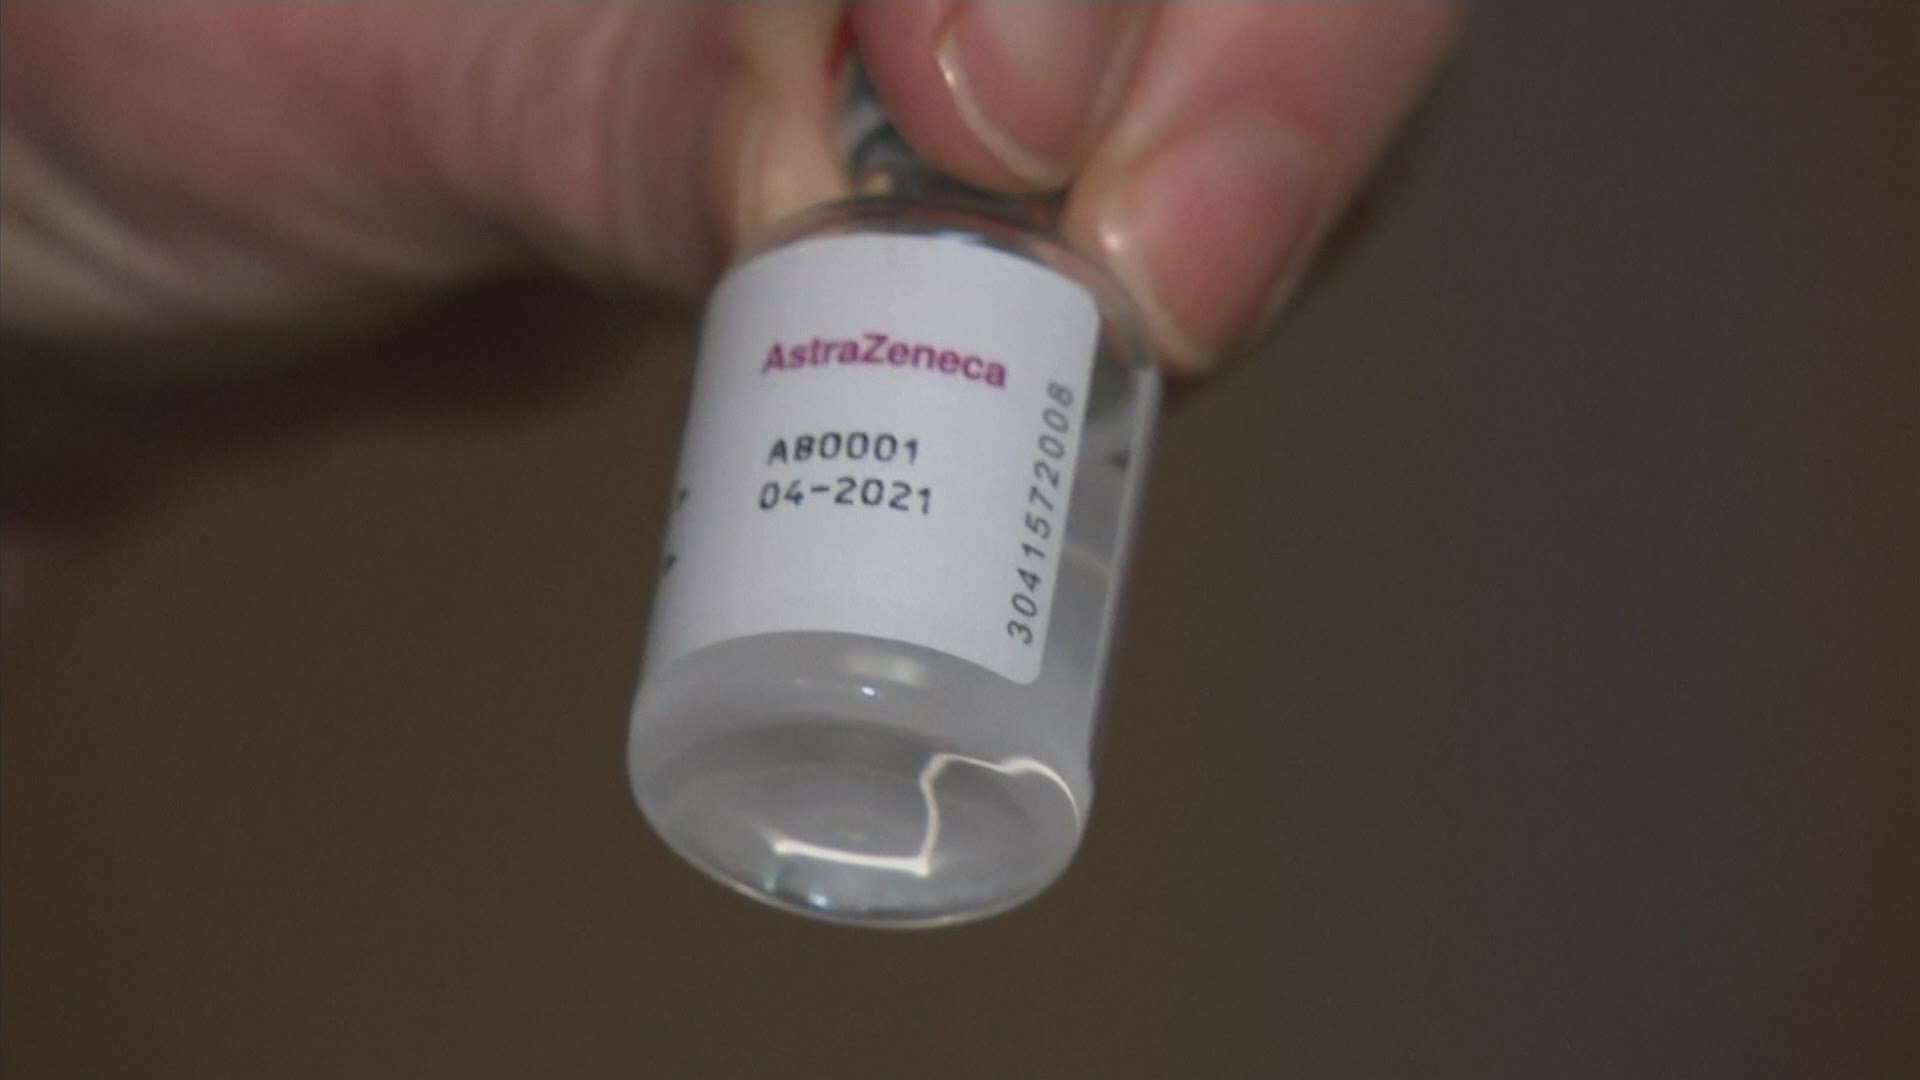 Federal health officials are questioning the results of an AstraZeneca trial. This as the company prepares to apply for emergency use of its vaccine with the FDA.